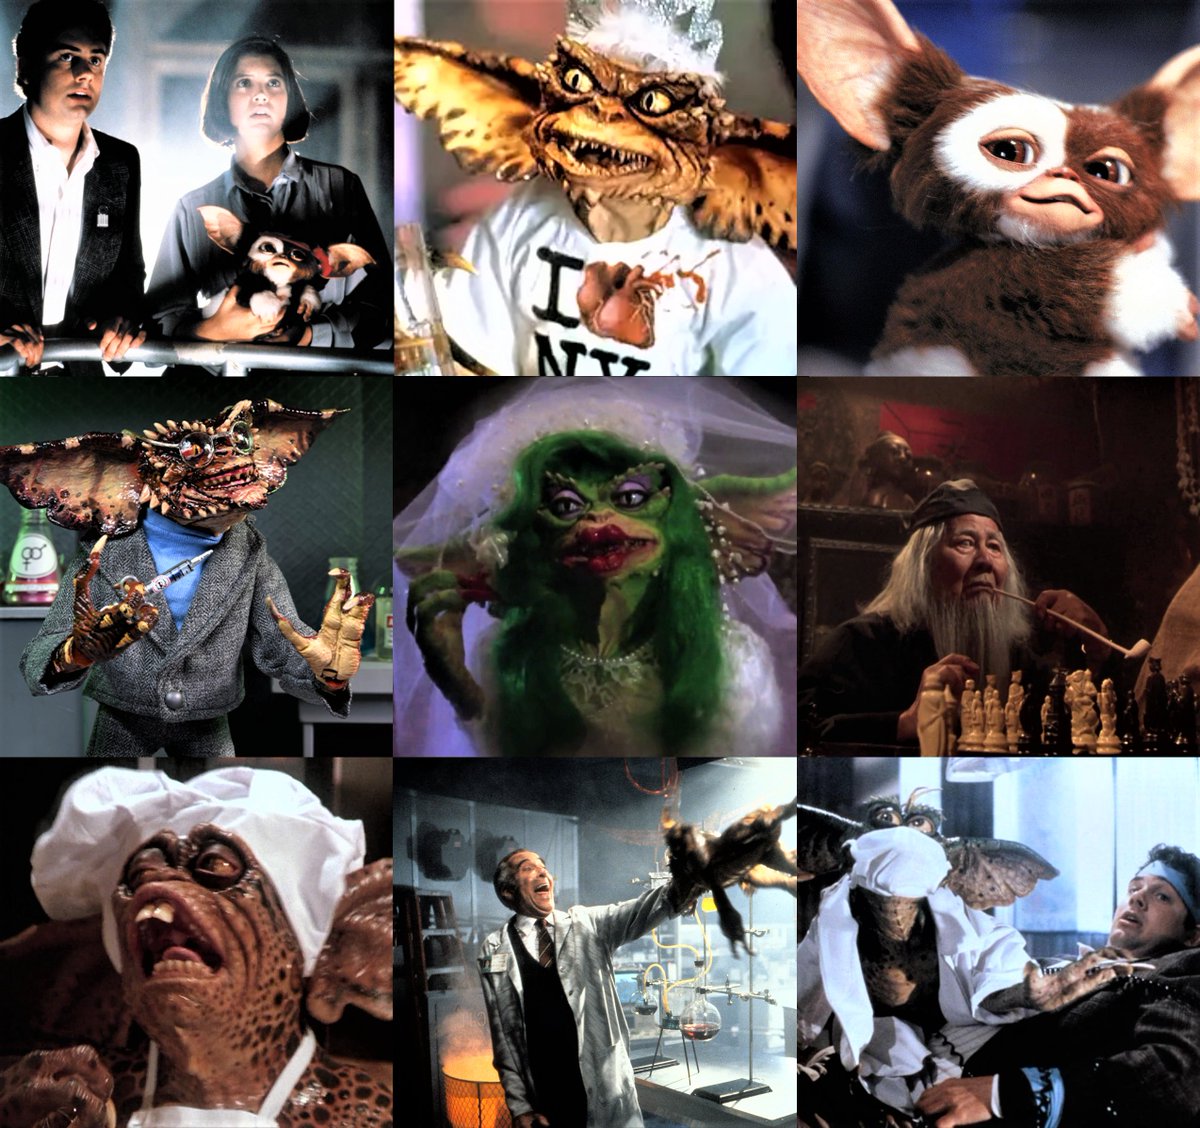 Gremlins 2: The New Batch (1990) was released 33 years ago on this day.